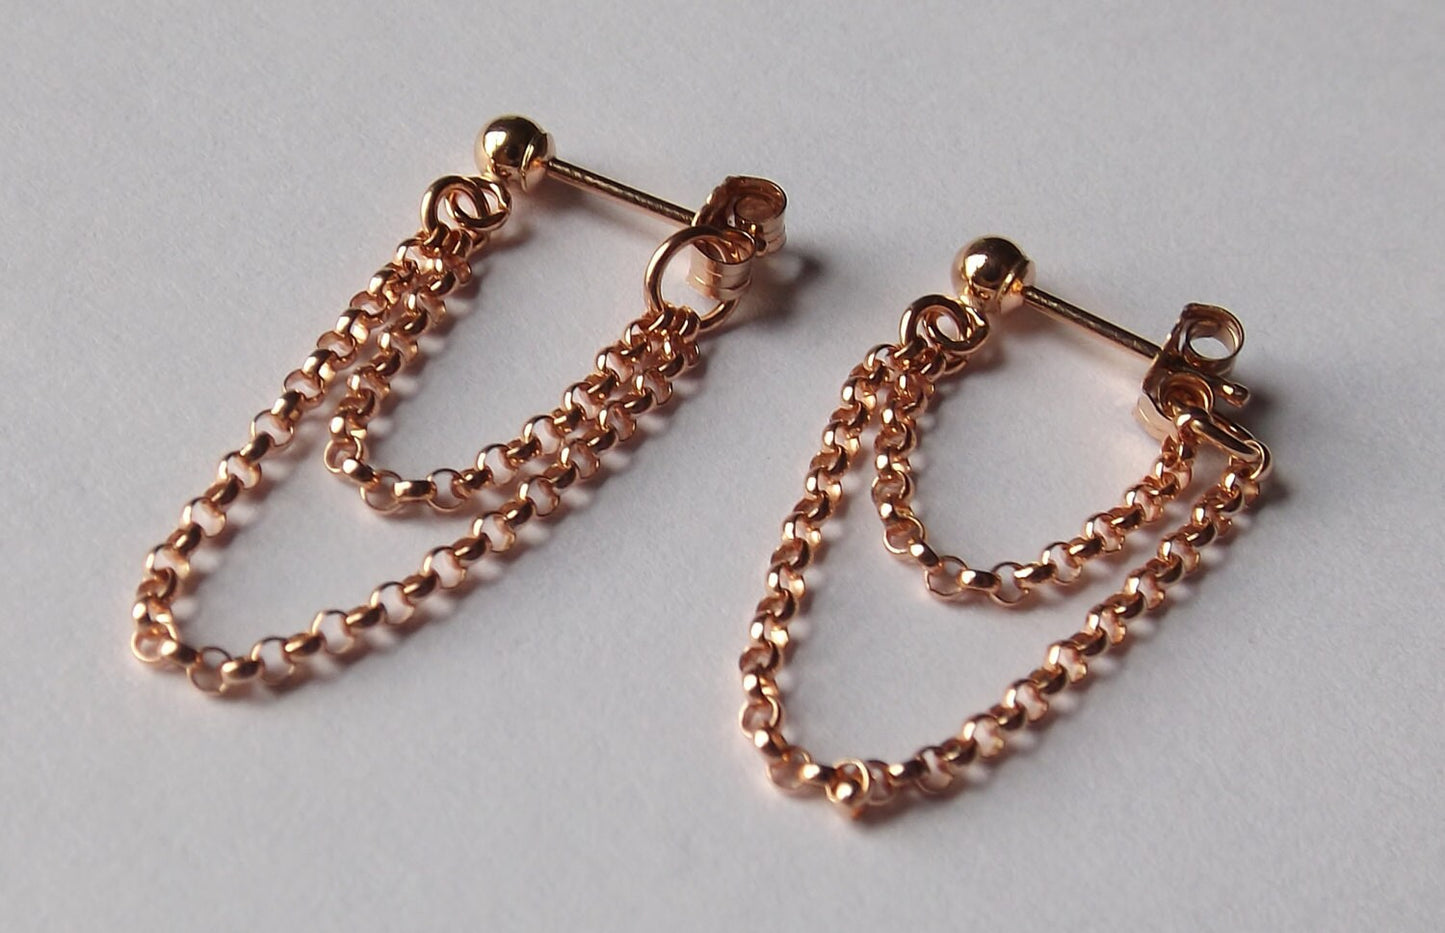 NEW AVAIL Tiny Chain Earrings, Simple Chain Earrings, Rose Gold Earrings, Dangle Earrings, Chain Stud Earrings, Boho Chain Earrings